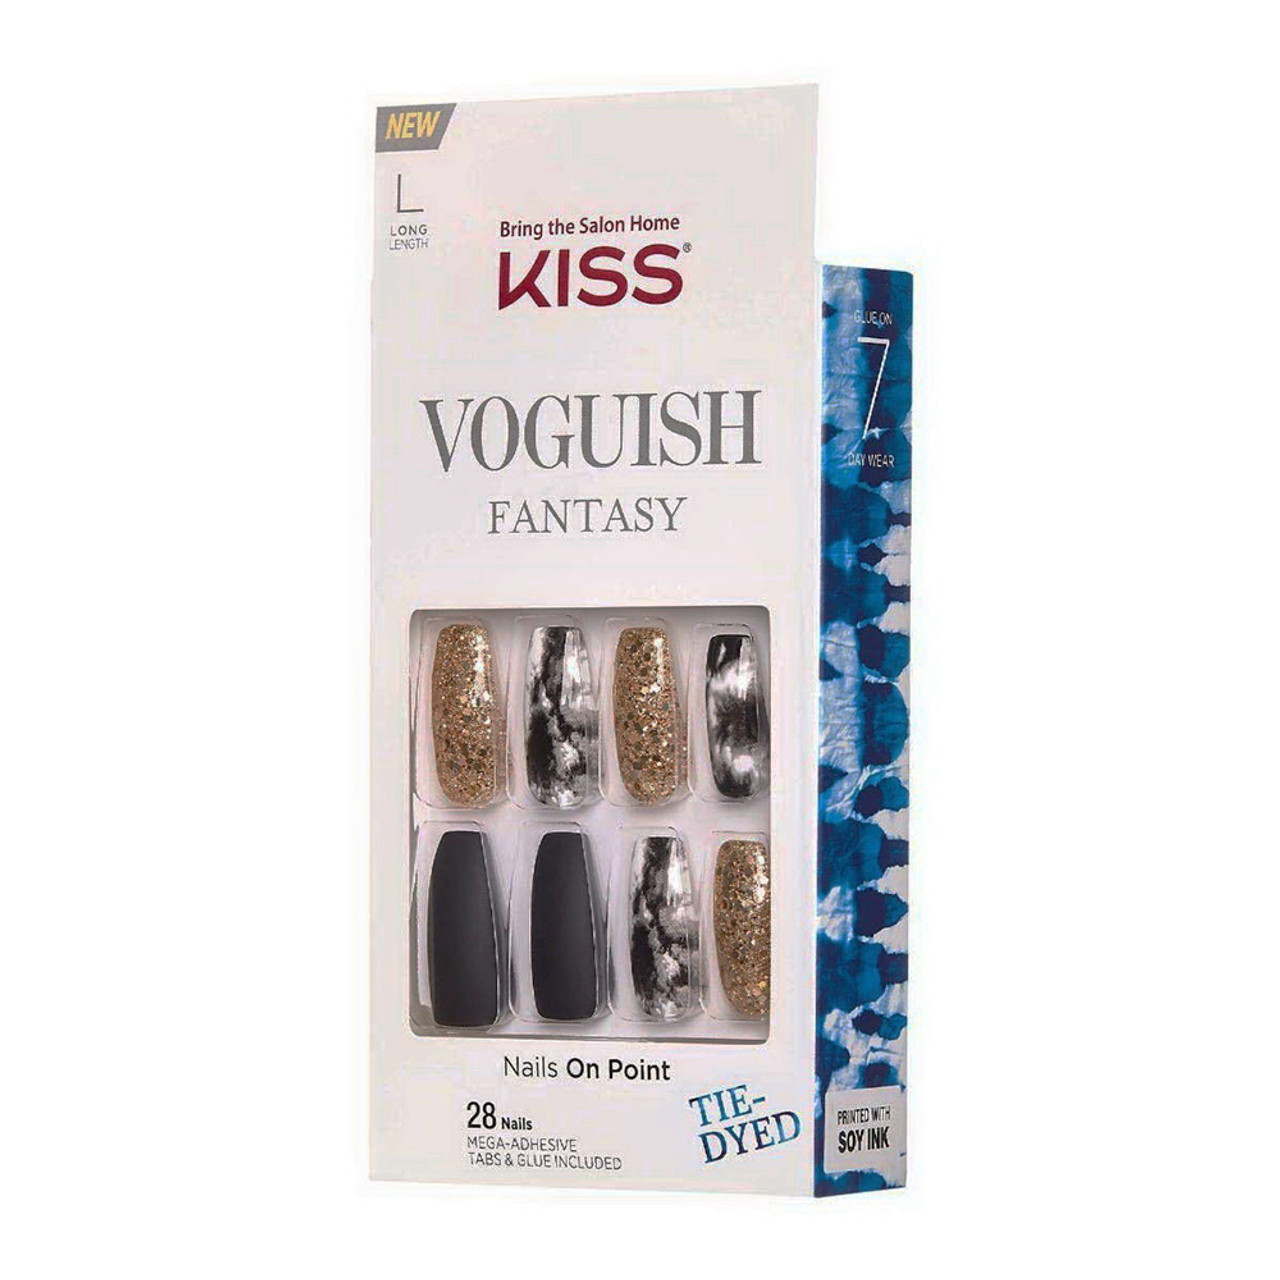 Kiss Voguish Fantasy Nails On Point Tie Dyed, New York, Long 28 Nails, 1 Ea